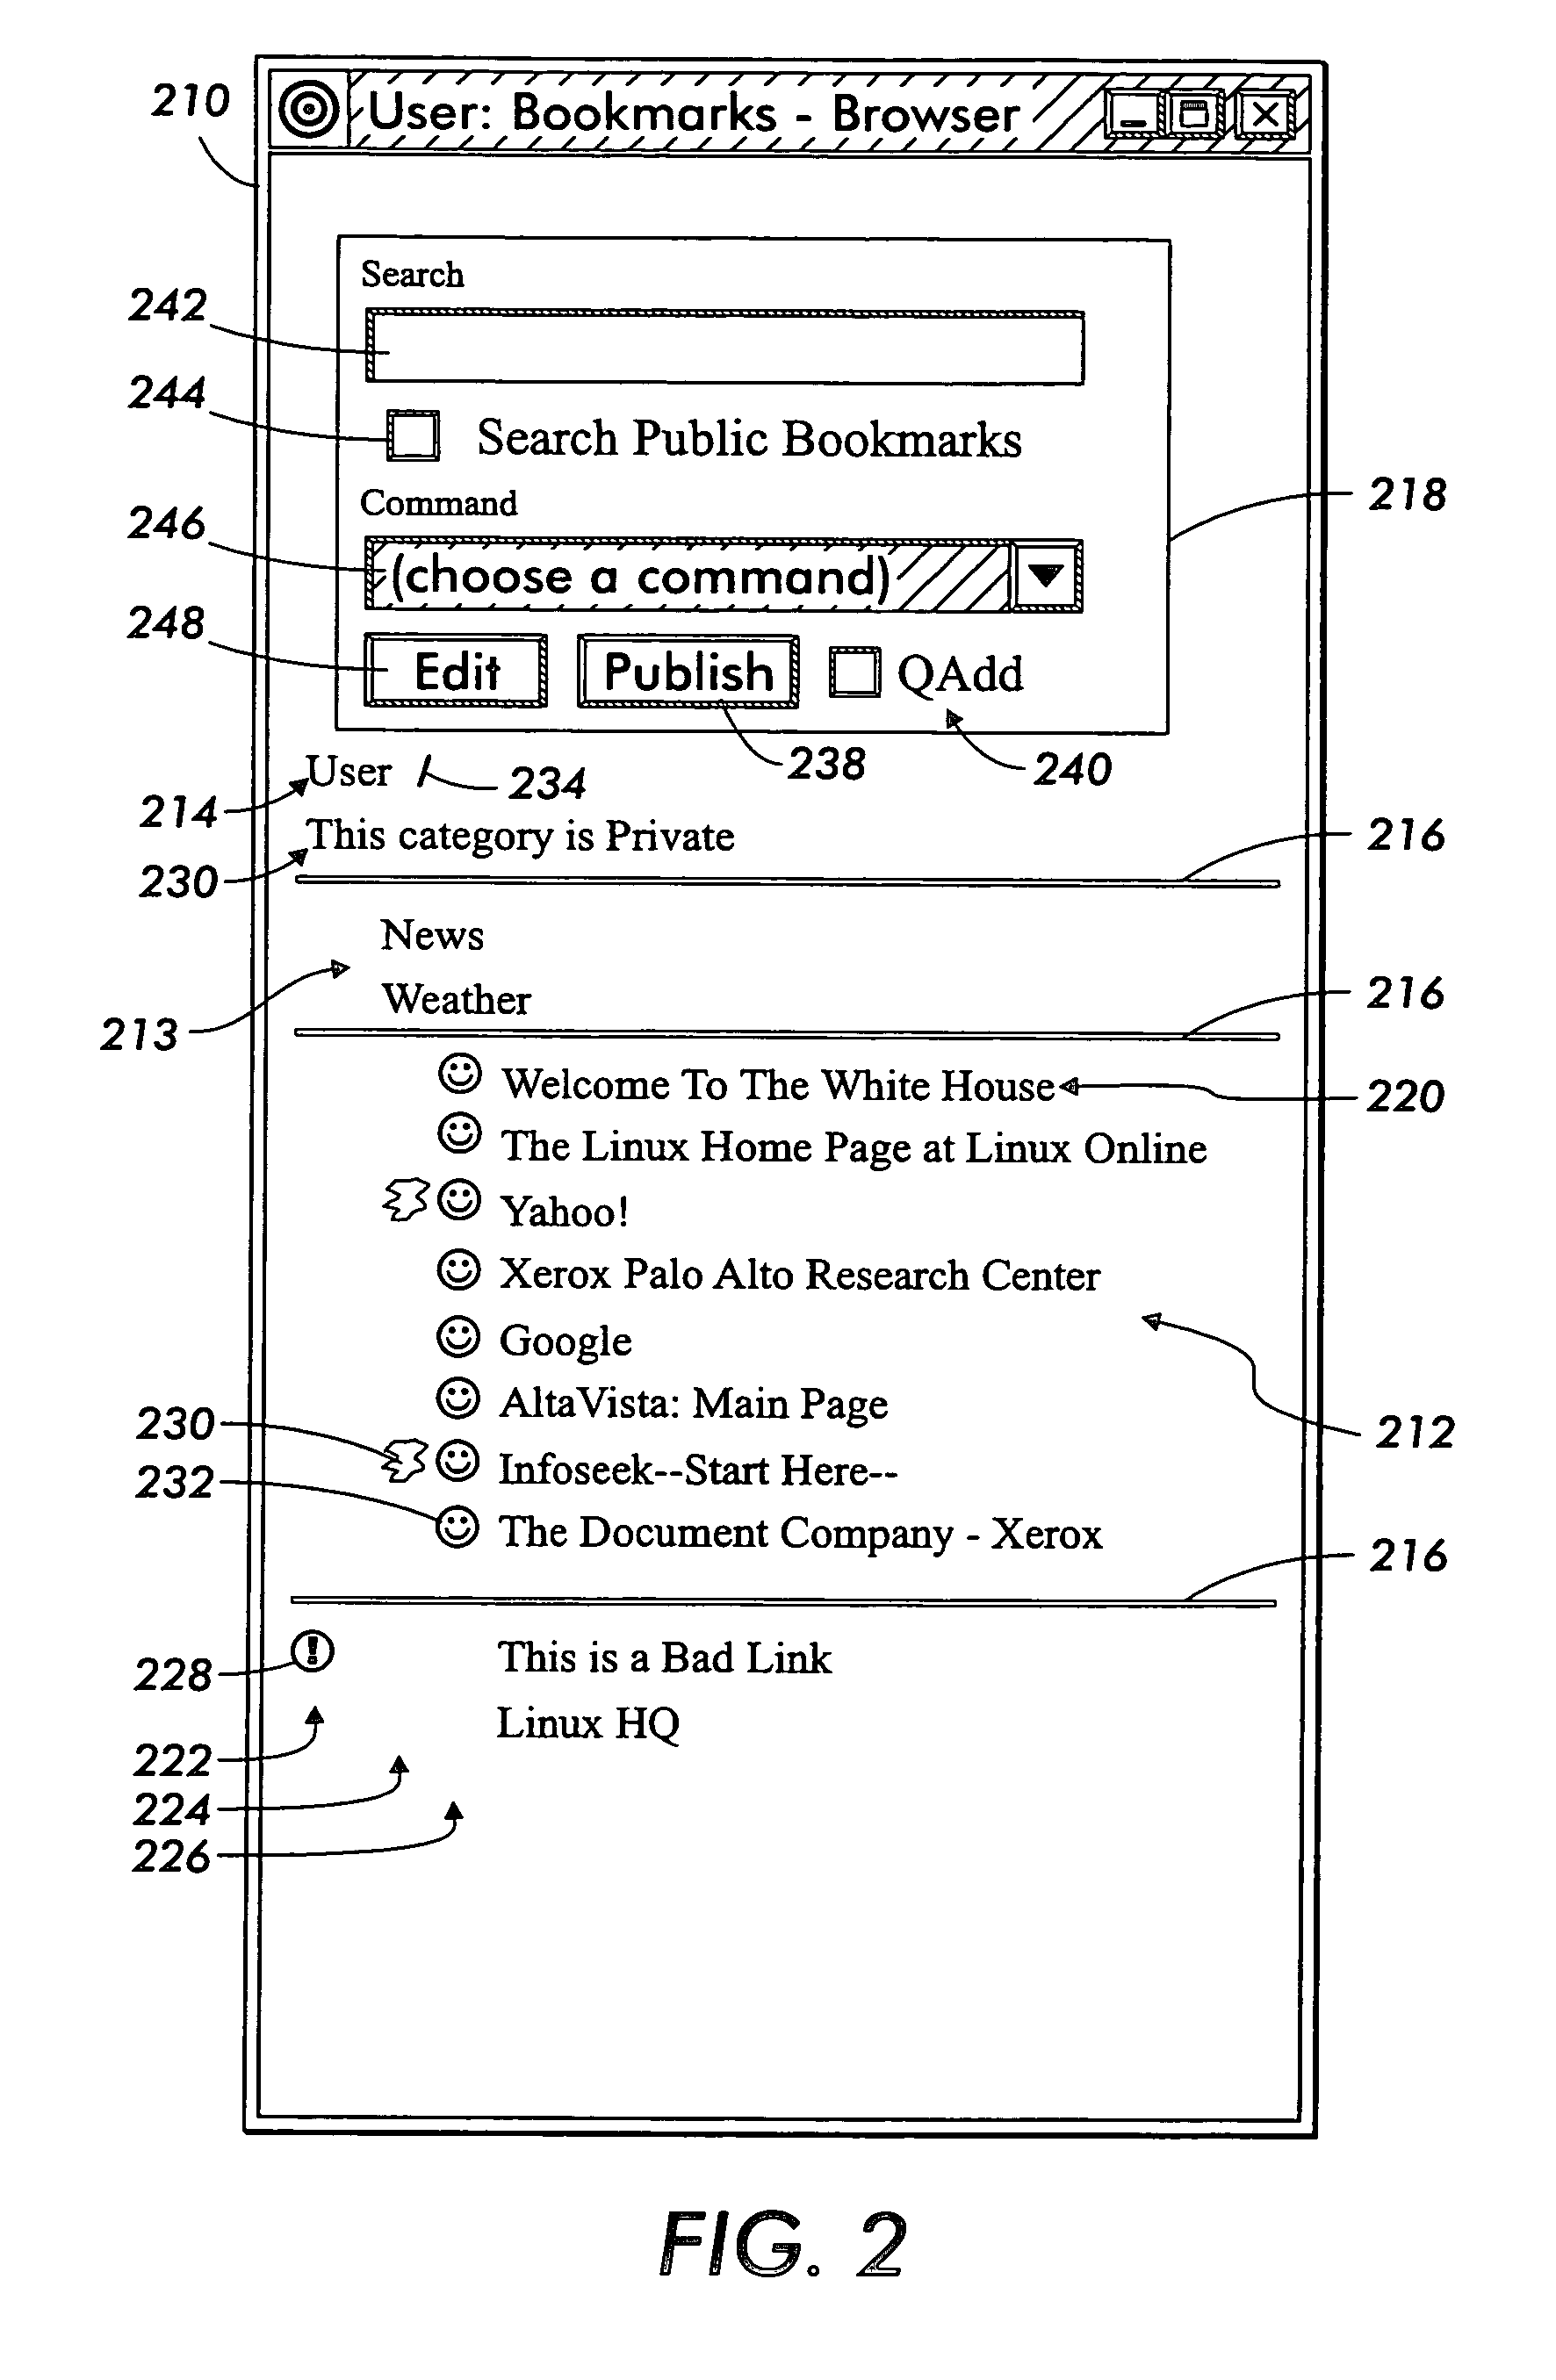 System and method for searching and recommending objects from a categorically organized information repository